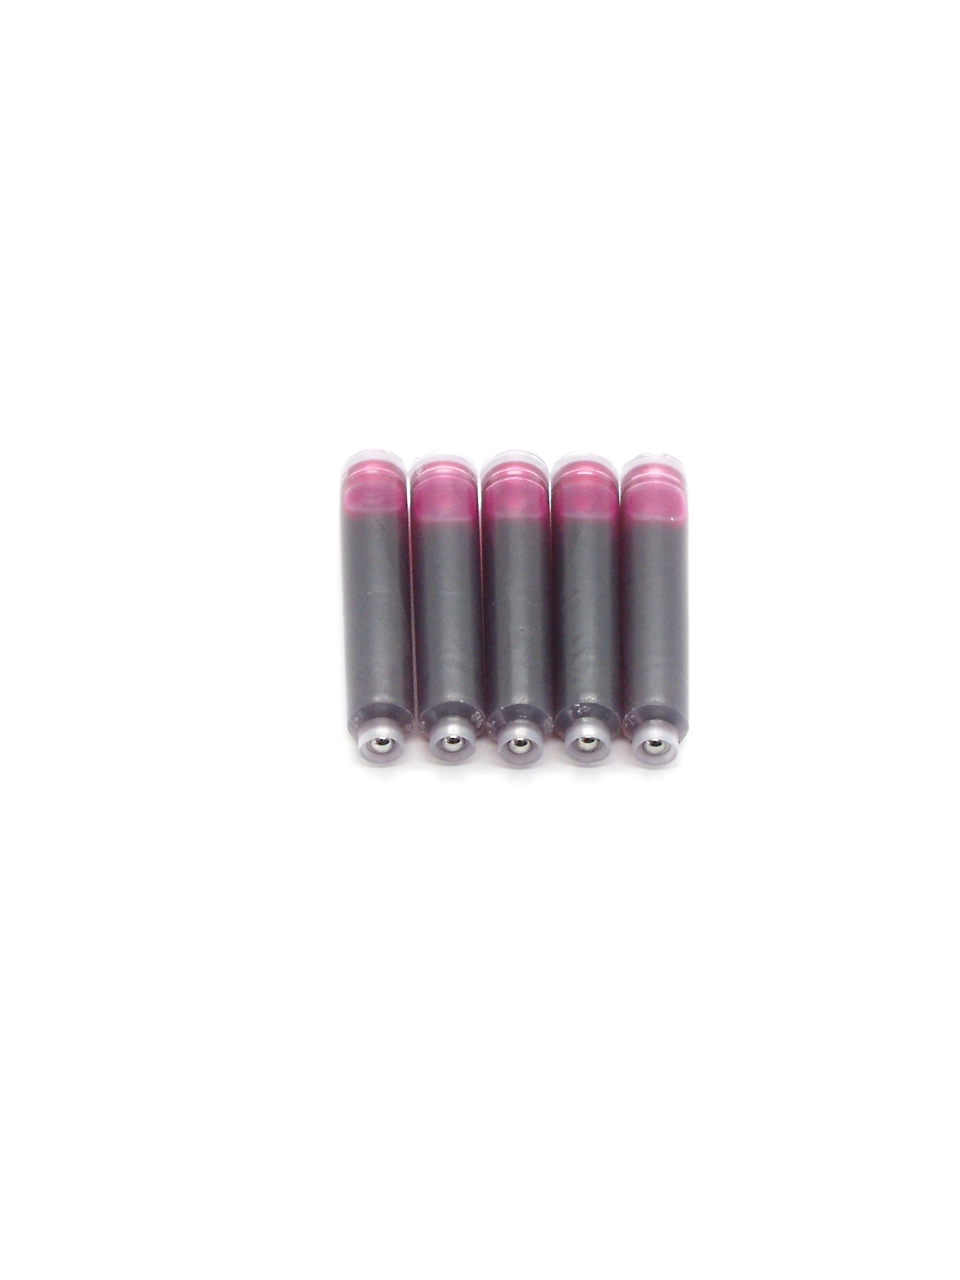 Top Ink Cartridges For Lalex Fountain Pens (Pink)